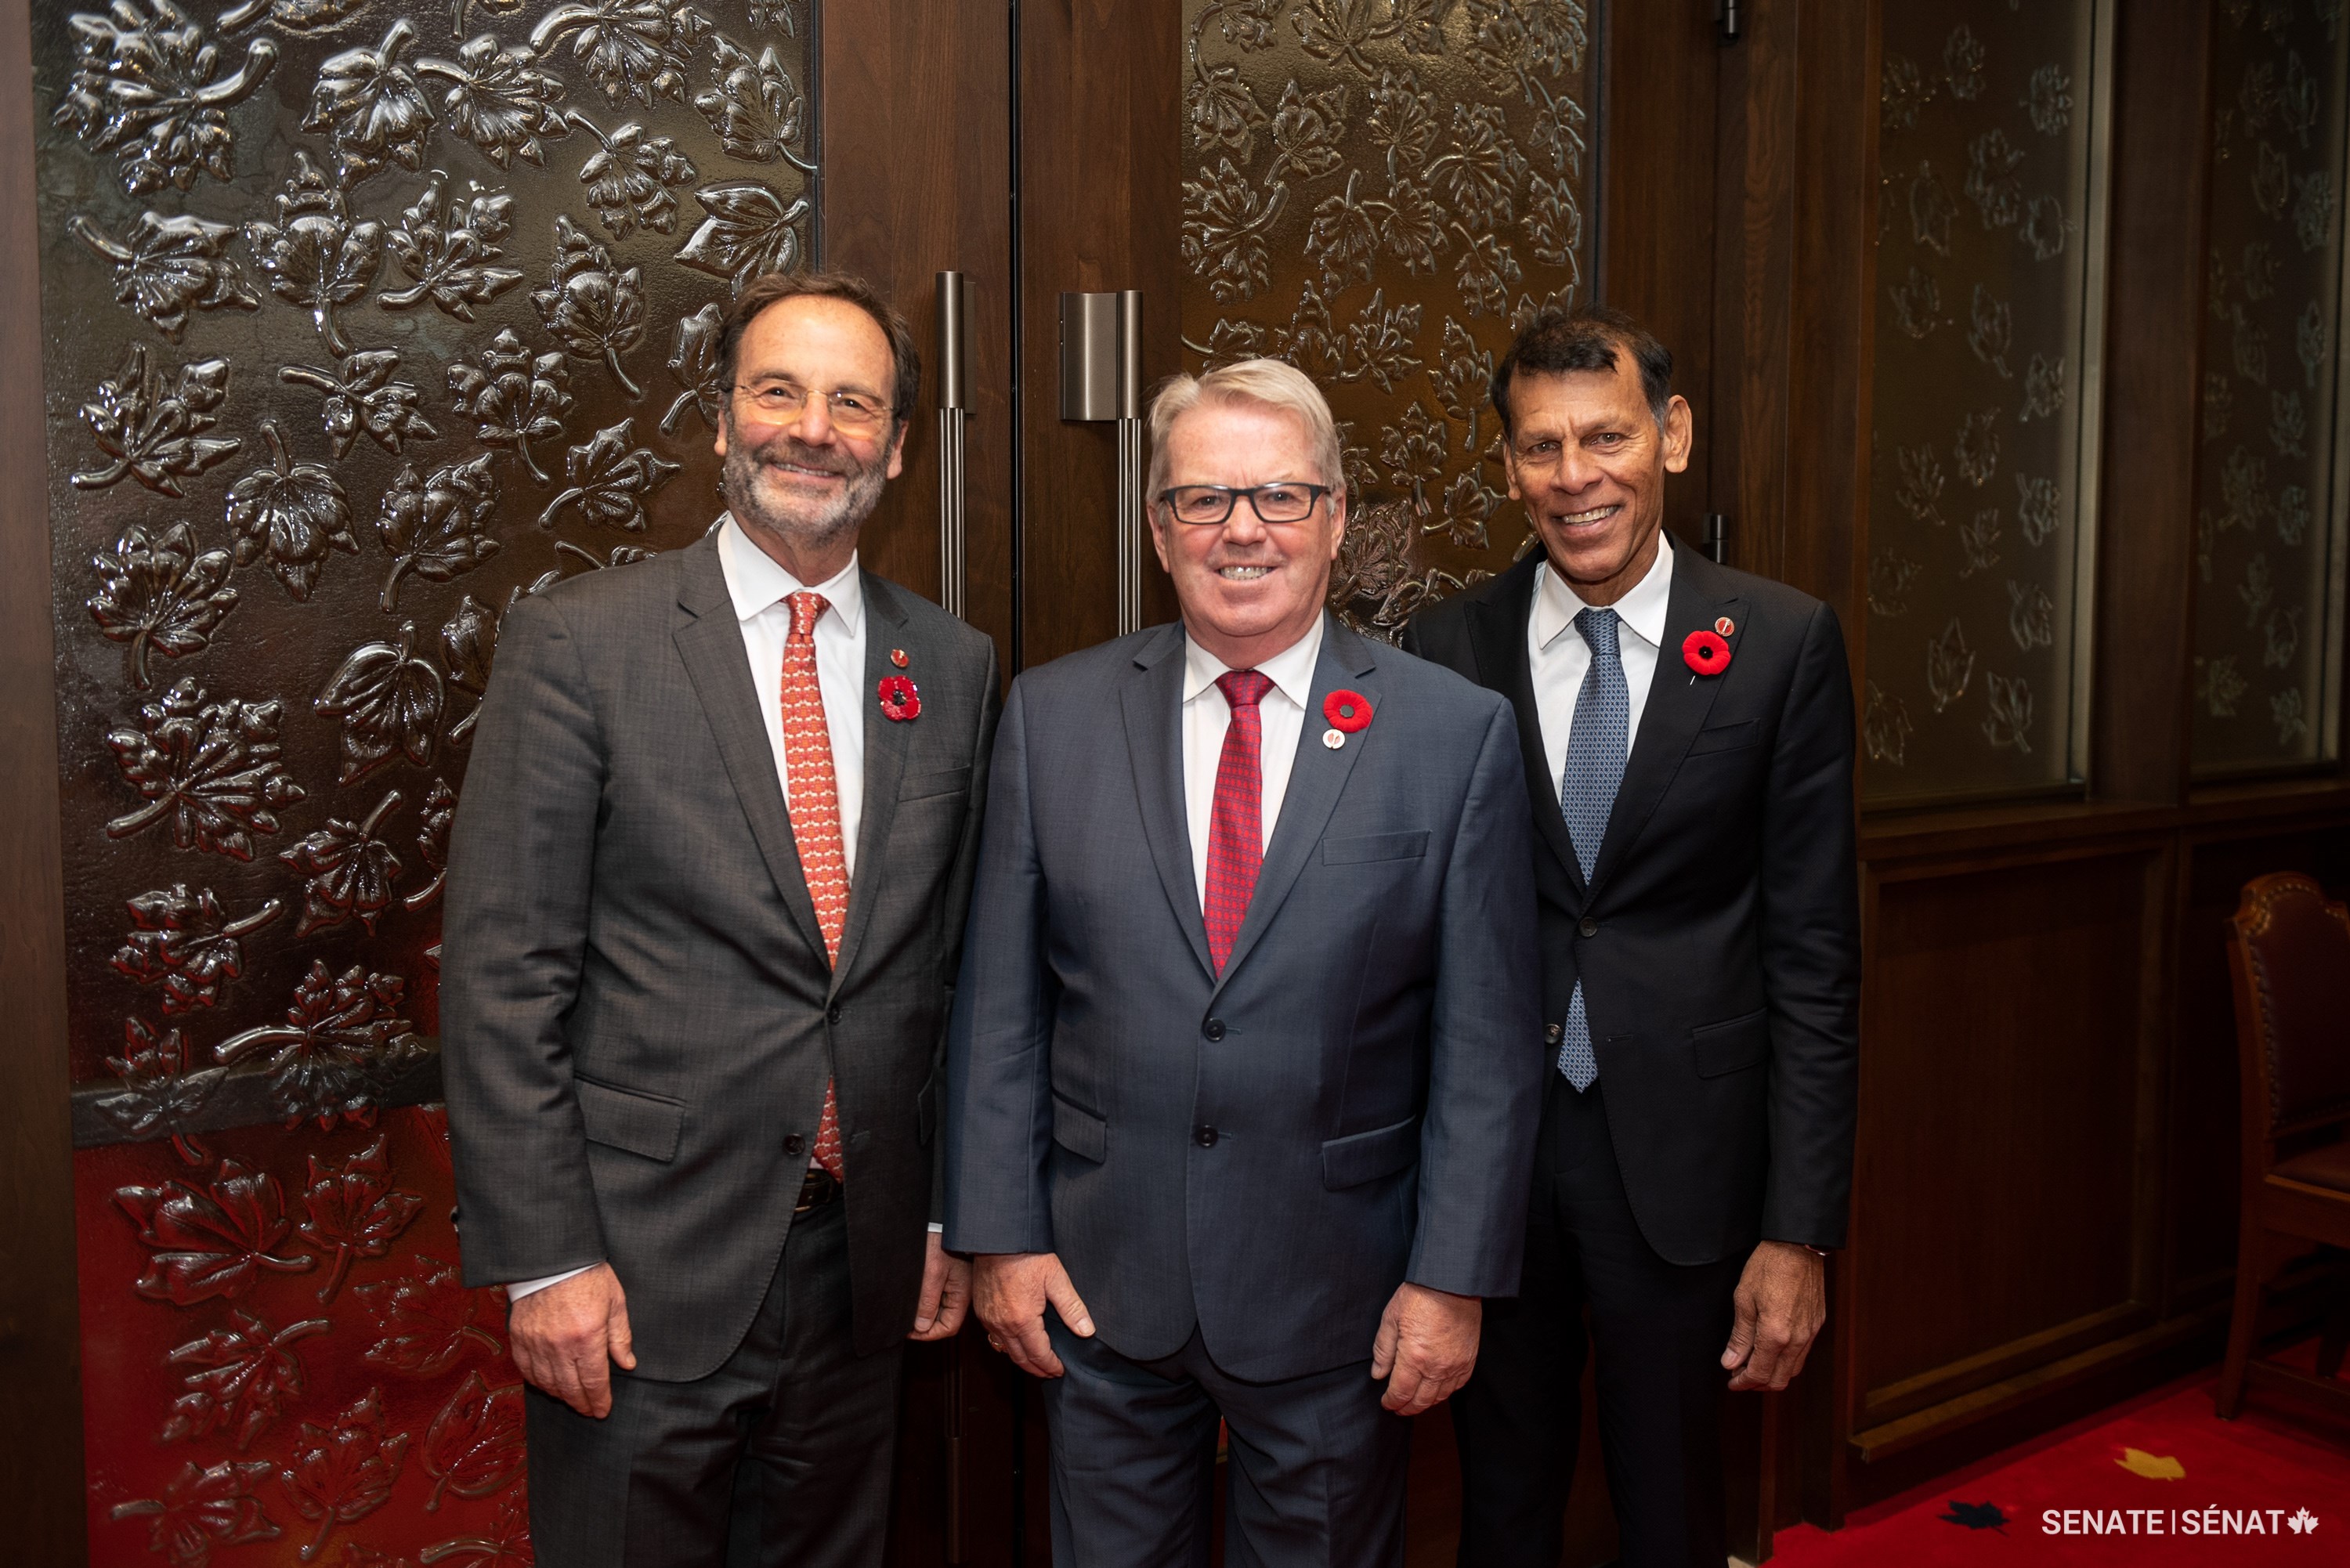 From left, Senator Marc Gold stands with senators Rodger Cuzner and Hassan Yussuff ahead of Senator Cuzner’s swearing-in ceremony on November 7, 2023.